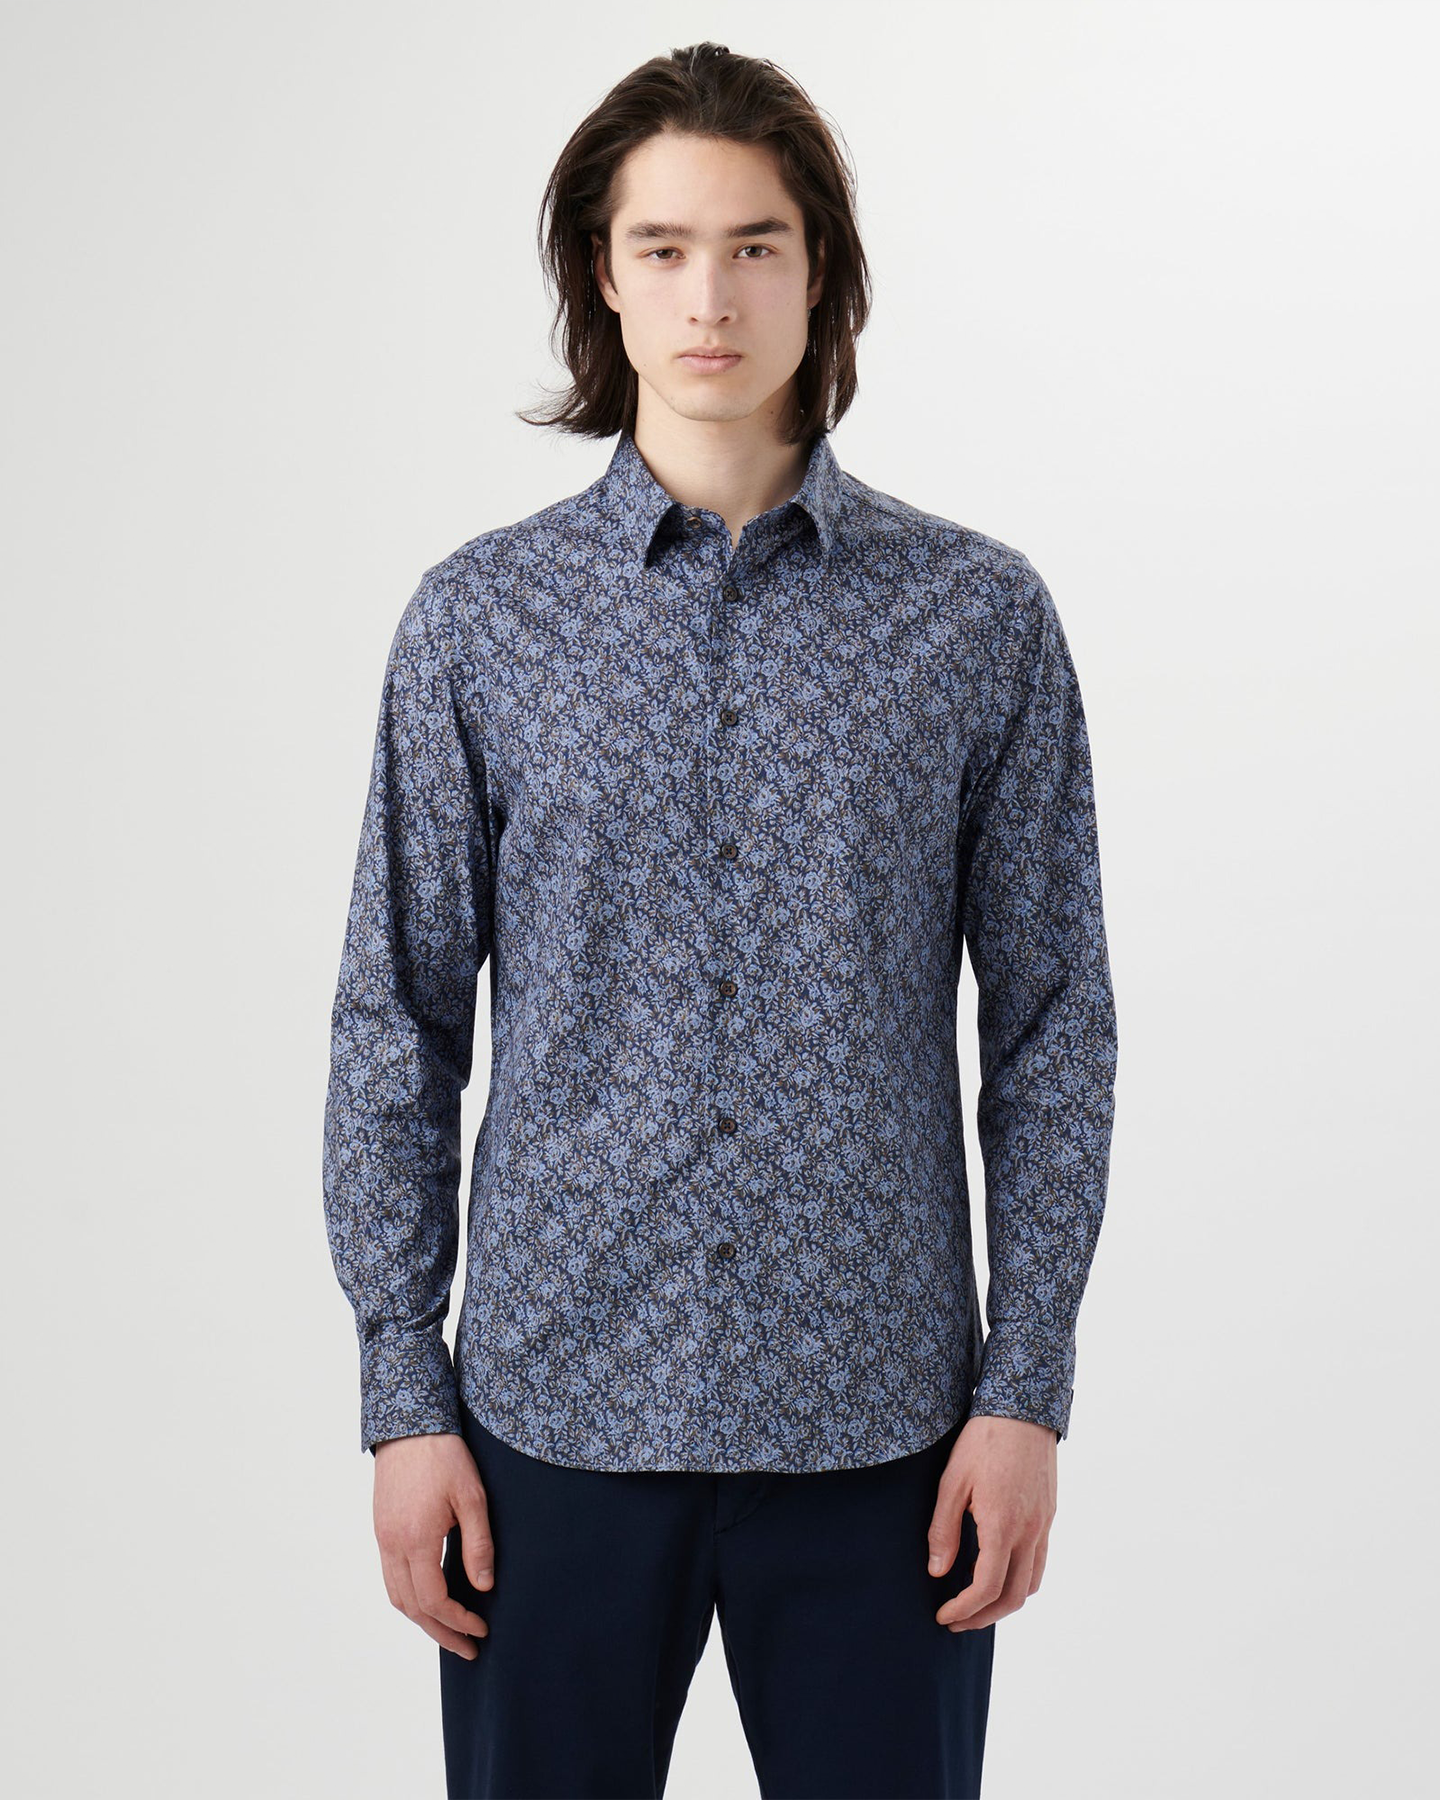 COMFORT STRETCH MIDNIGHT ROSE PRINT SHAPED FIT SHIRT - NAVY